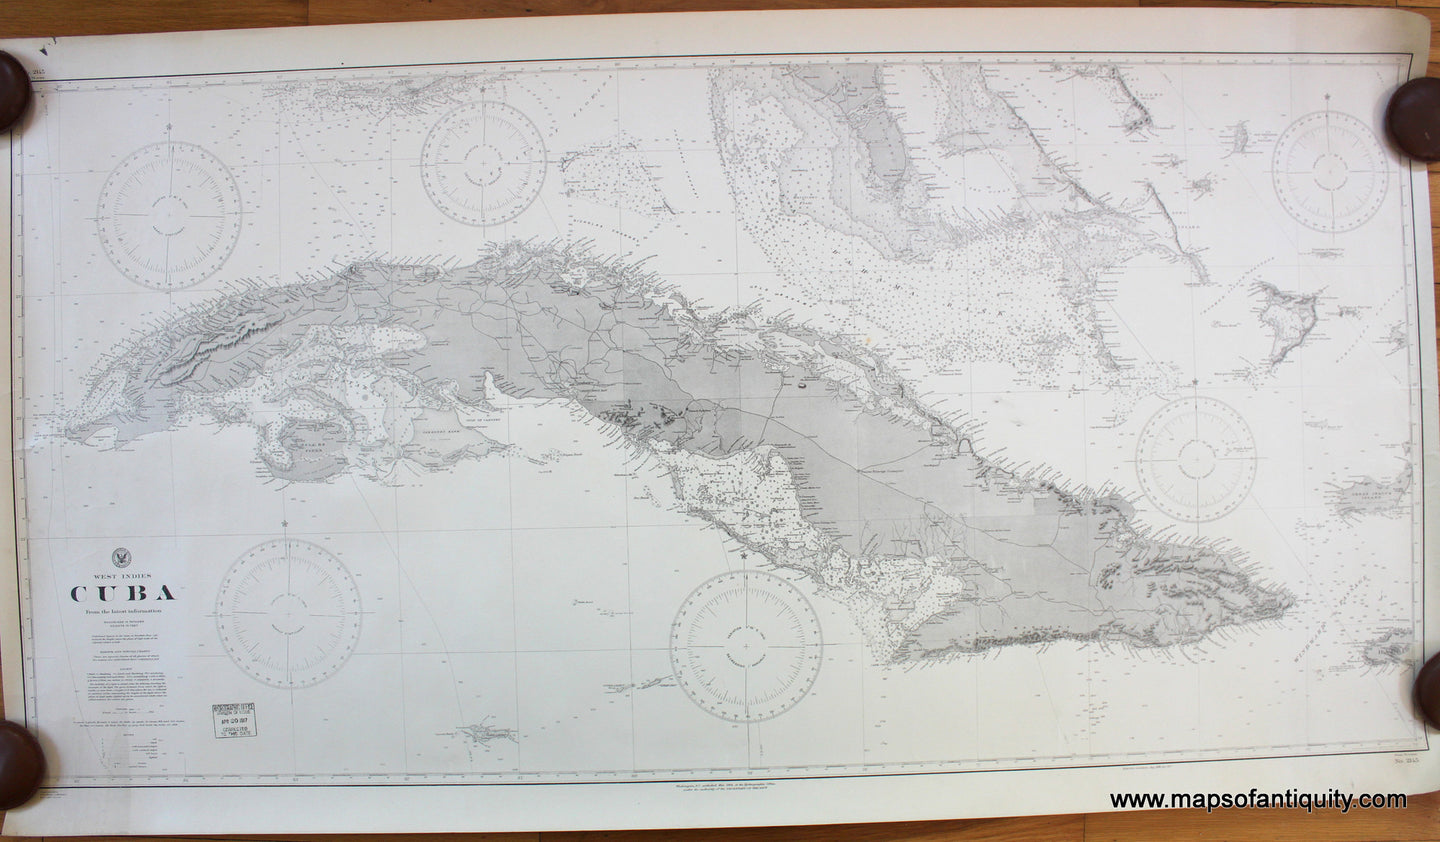 Antique-Map-West-Indies-Cuba-Hydrographic-Office-of-the-US-Navy-1917-Maps-Of-Antiquity